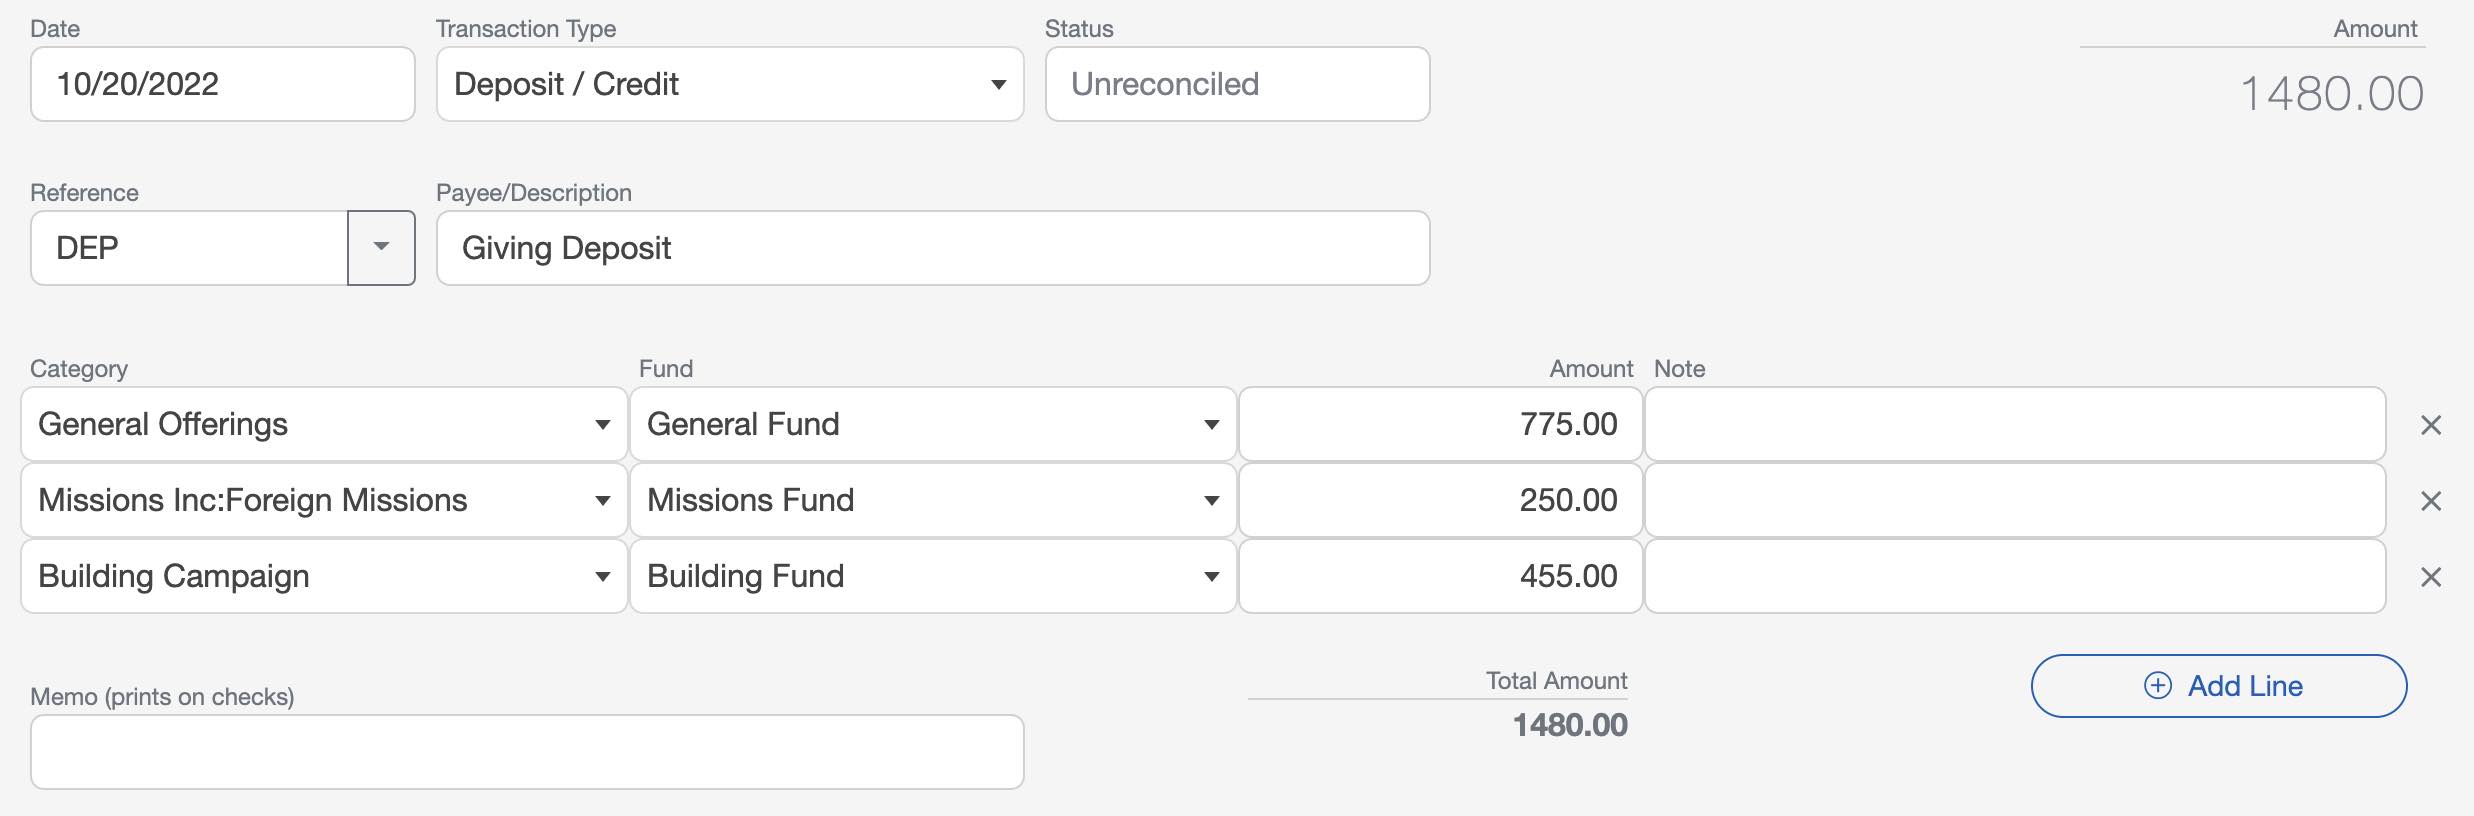 You can edit church donation details in the accounting software